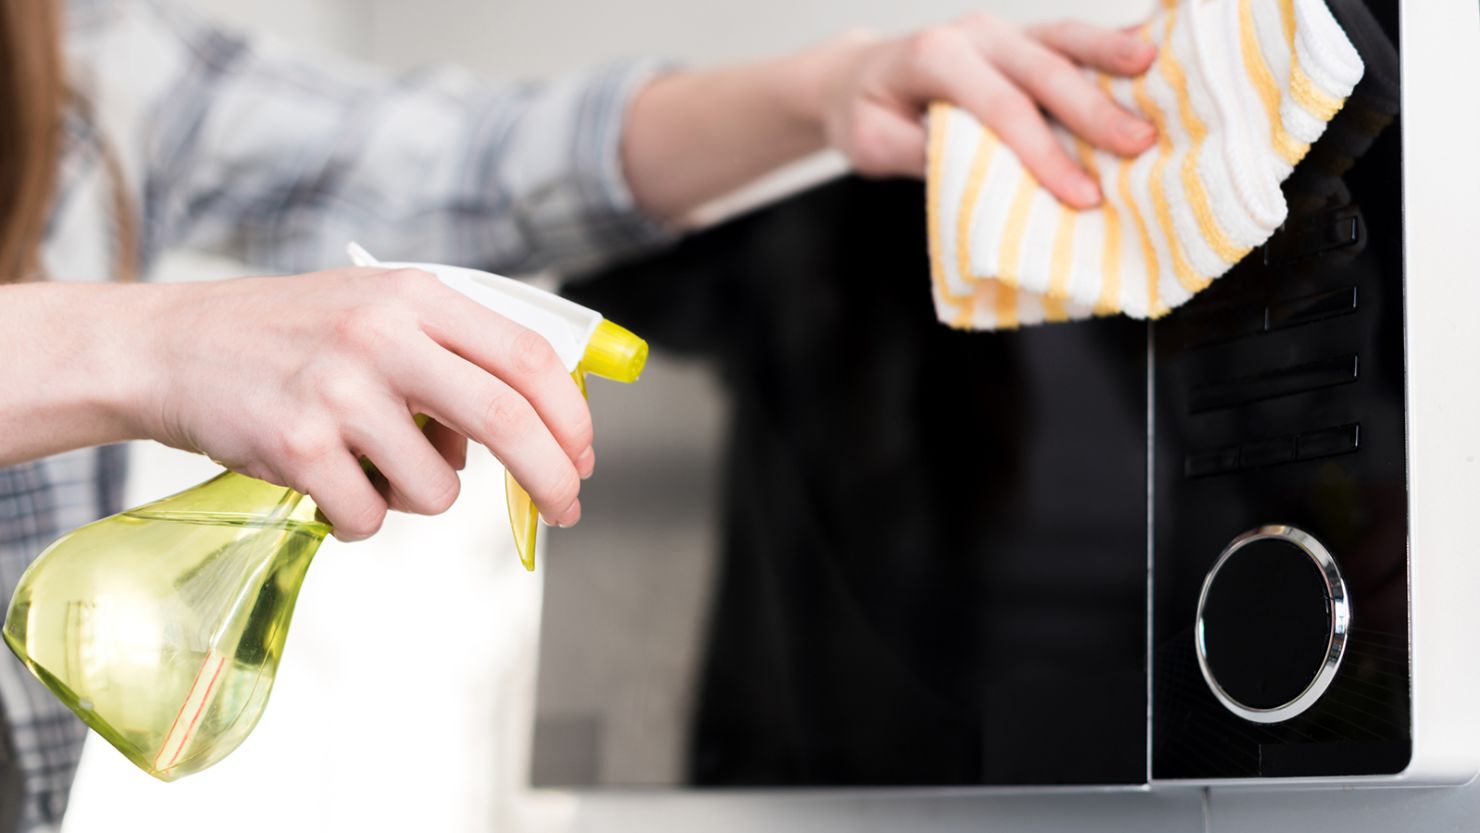 4 quick and simple ways to clean your microwave and filter